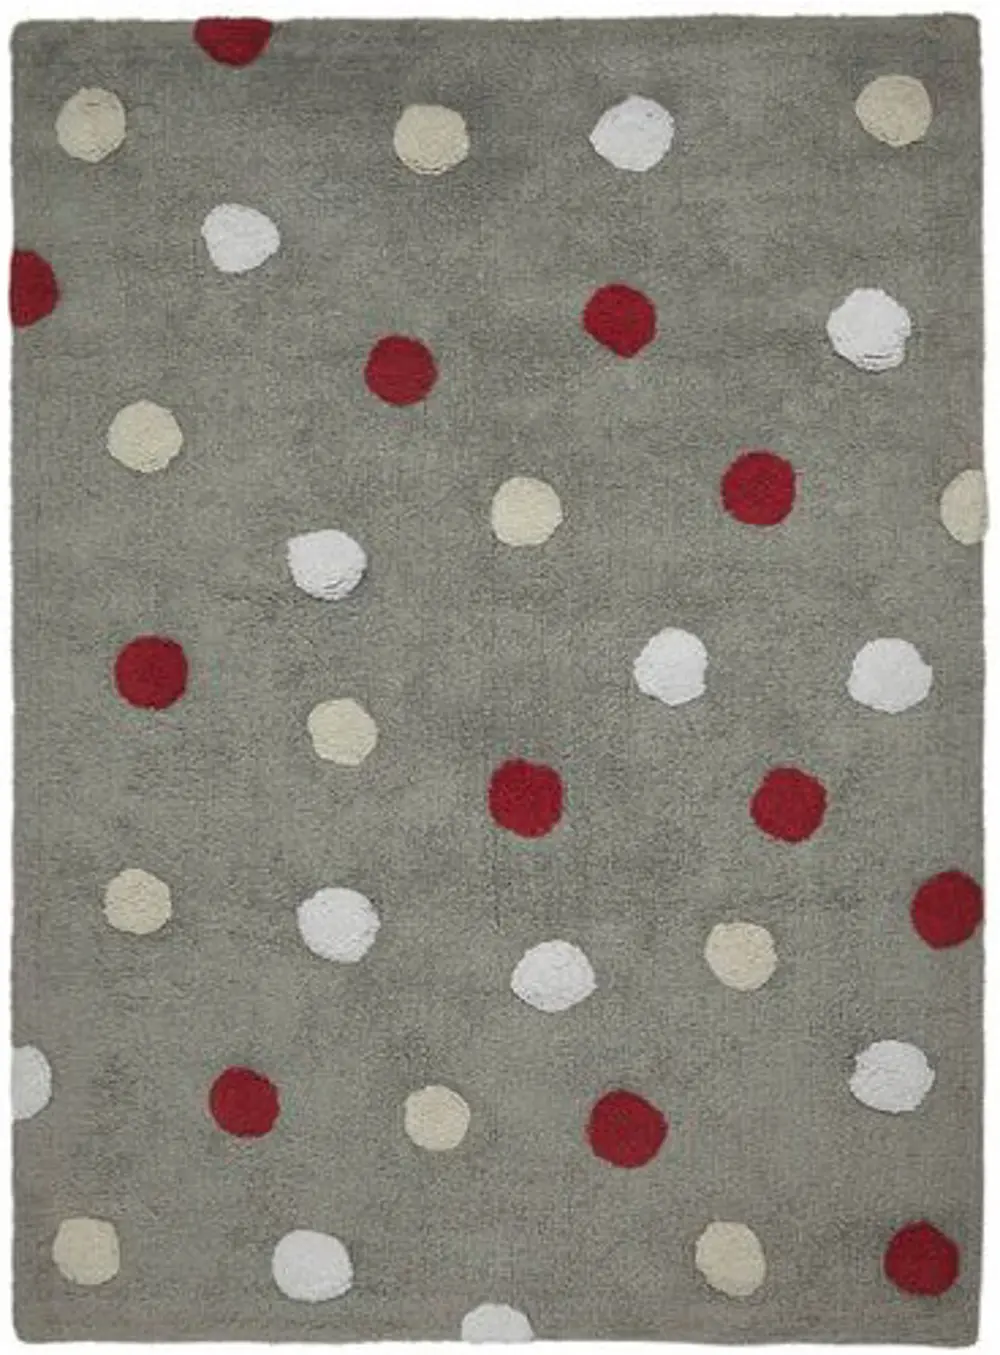 C-TT-3 4 x 5 Small Tricolor Polka Dots Gray and Red Washable Rug-1